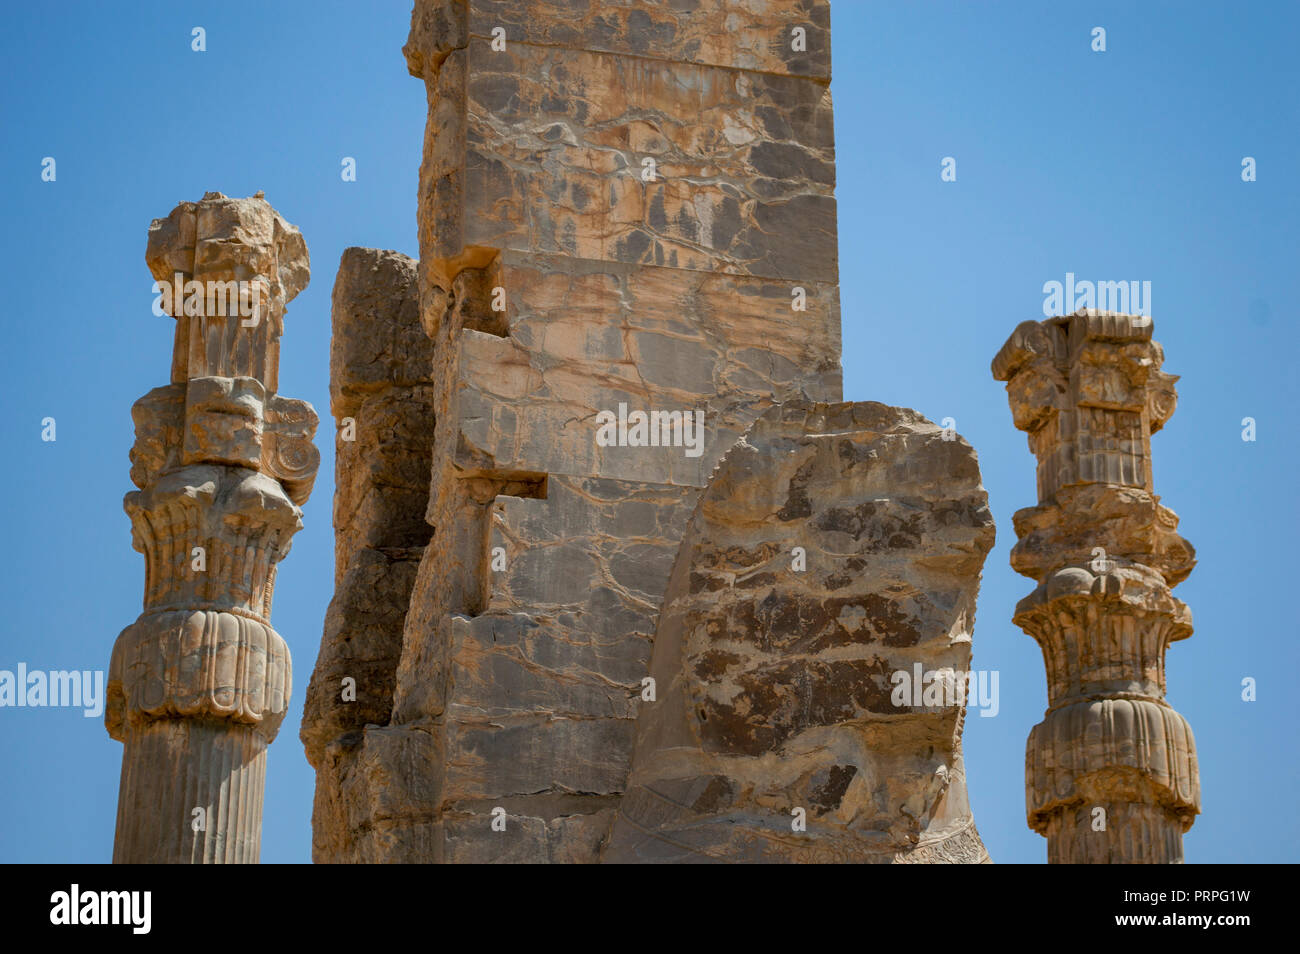 The Gate of All Nations at Persepolis, Iran Stock Photo